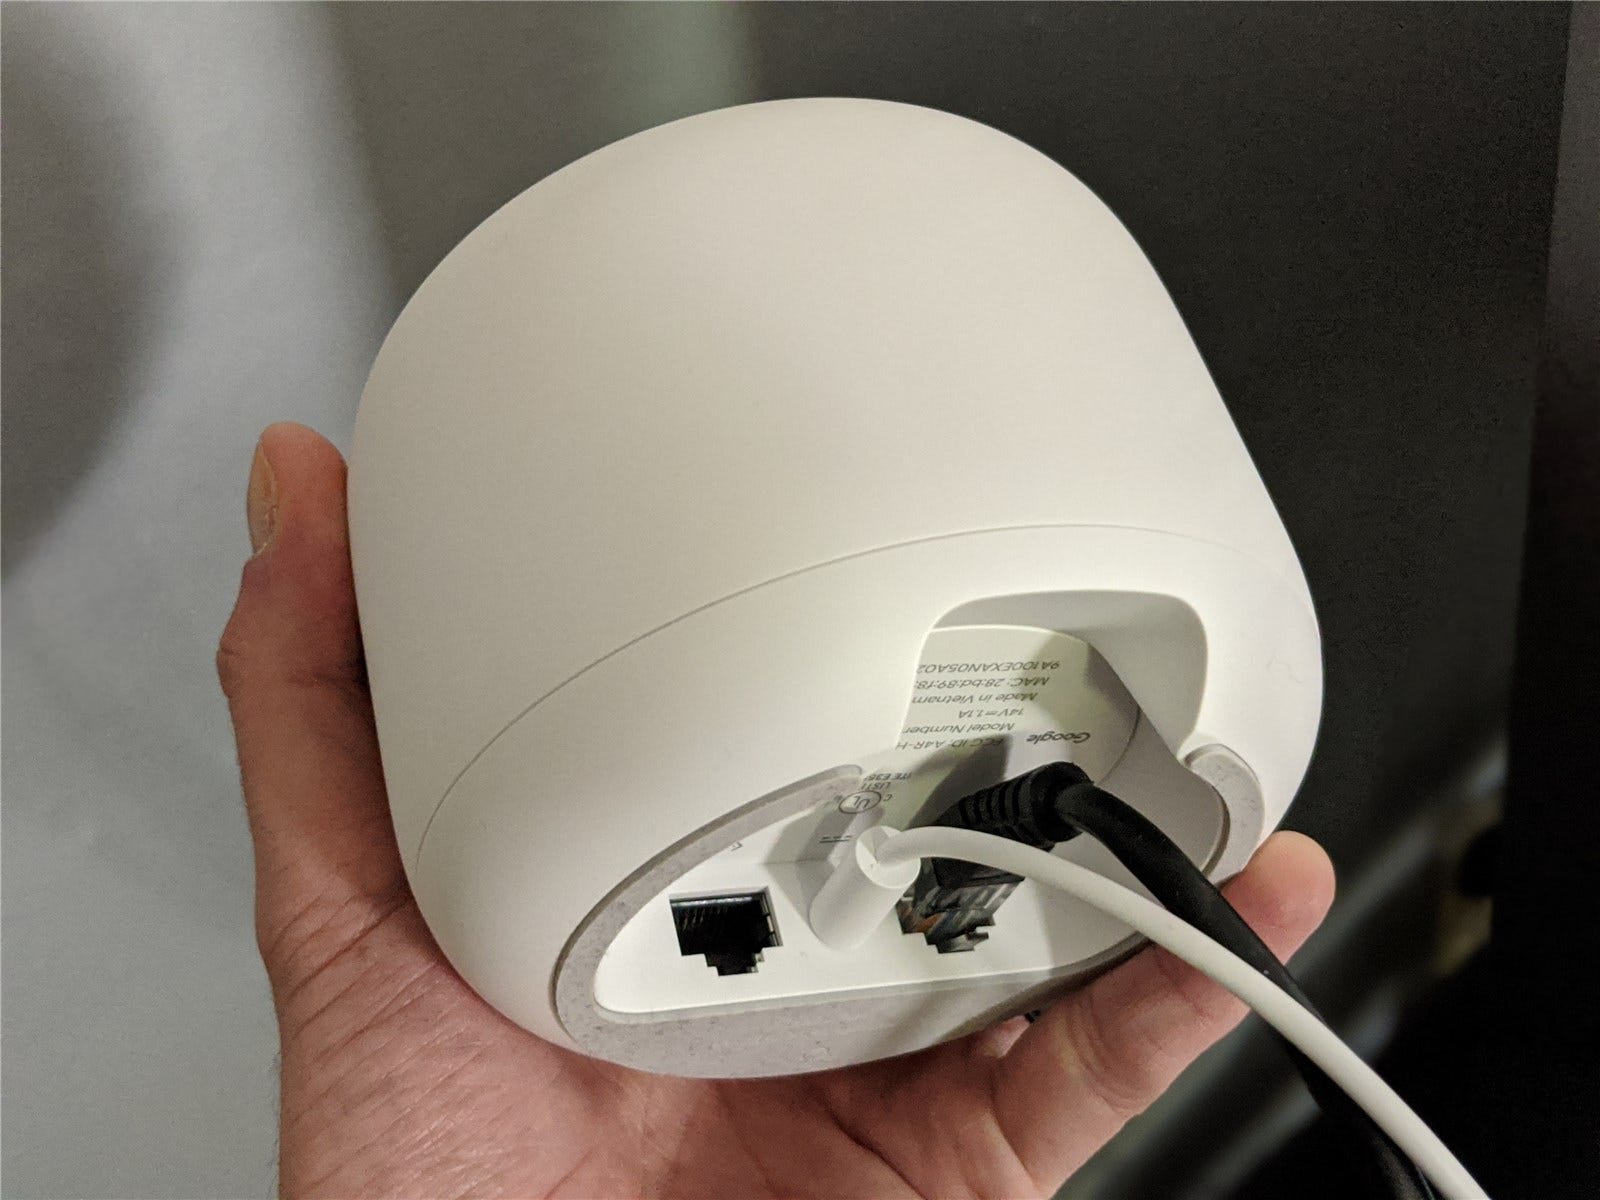 How To Reset Nest Wi-Fi Router